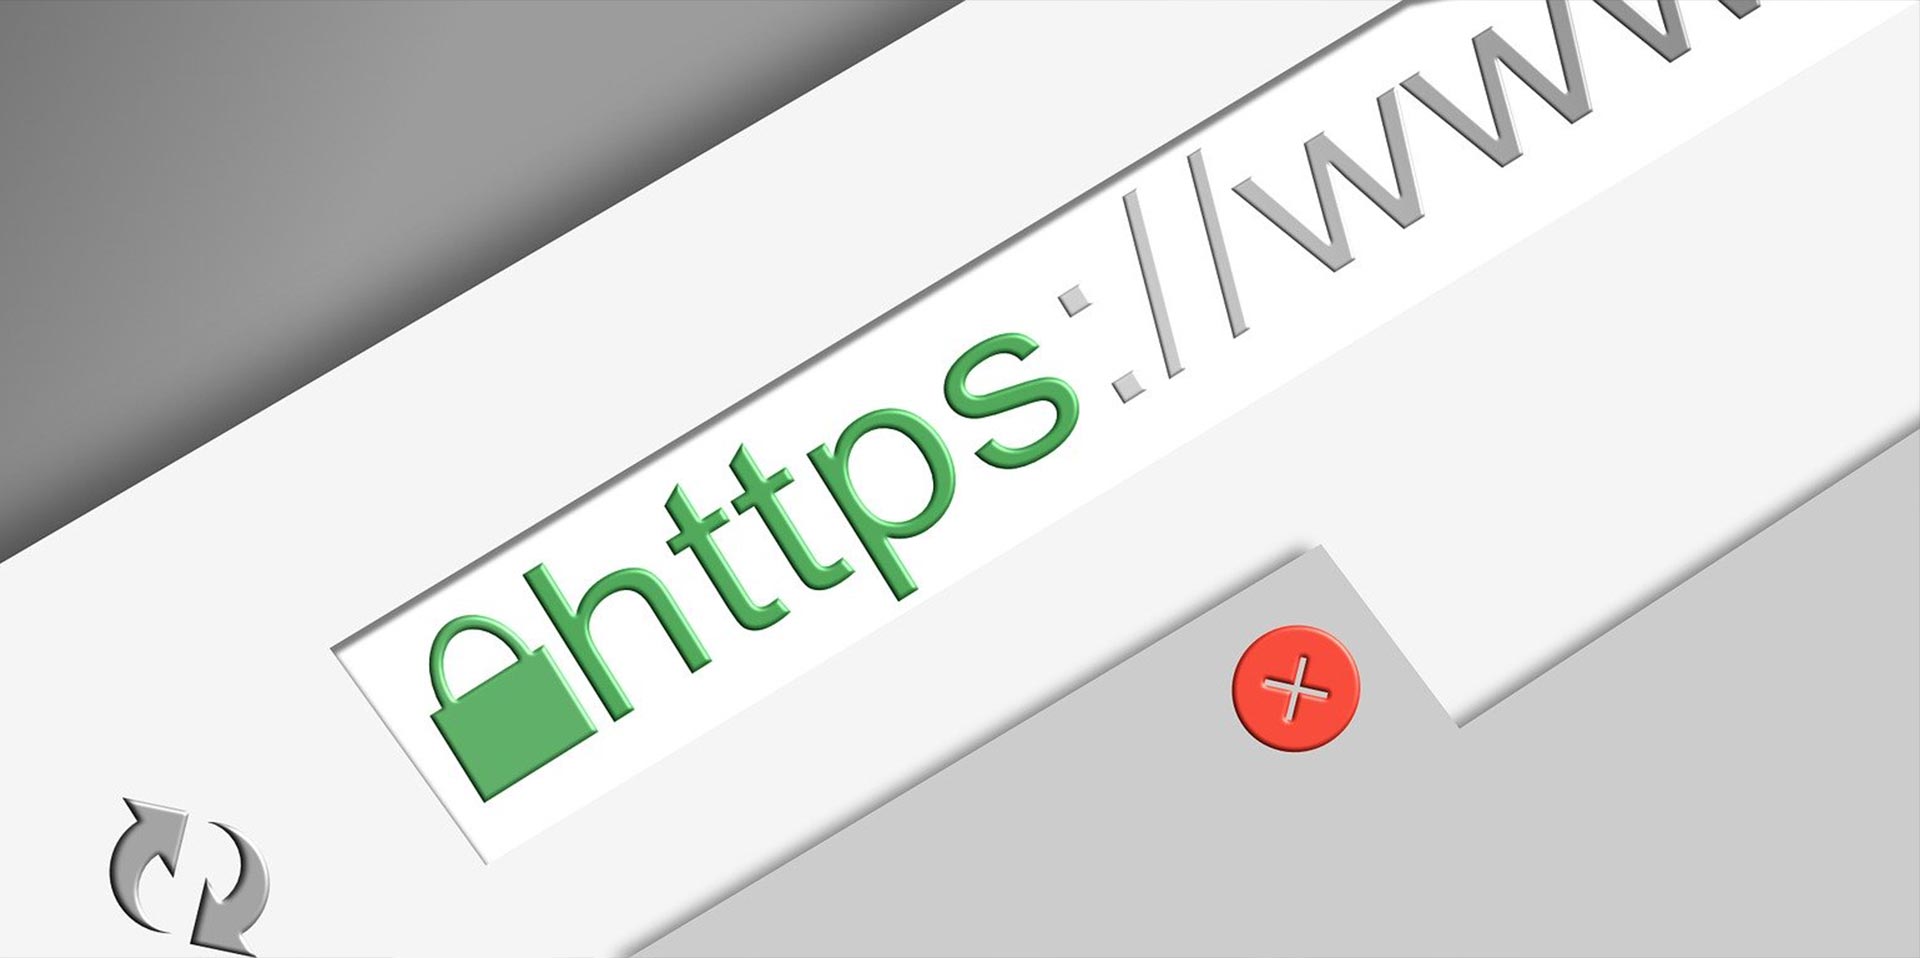 What Are SSL Certificates And Why Are They Important?